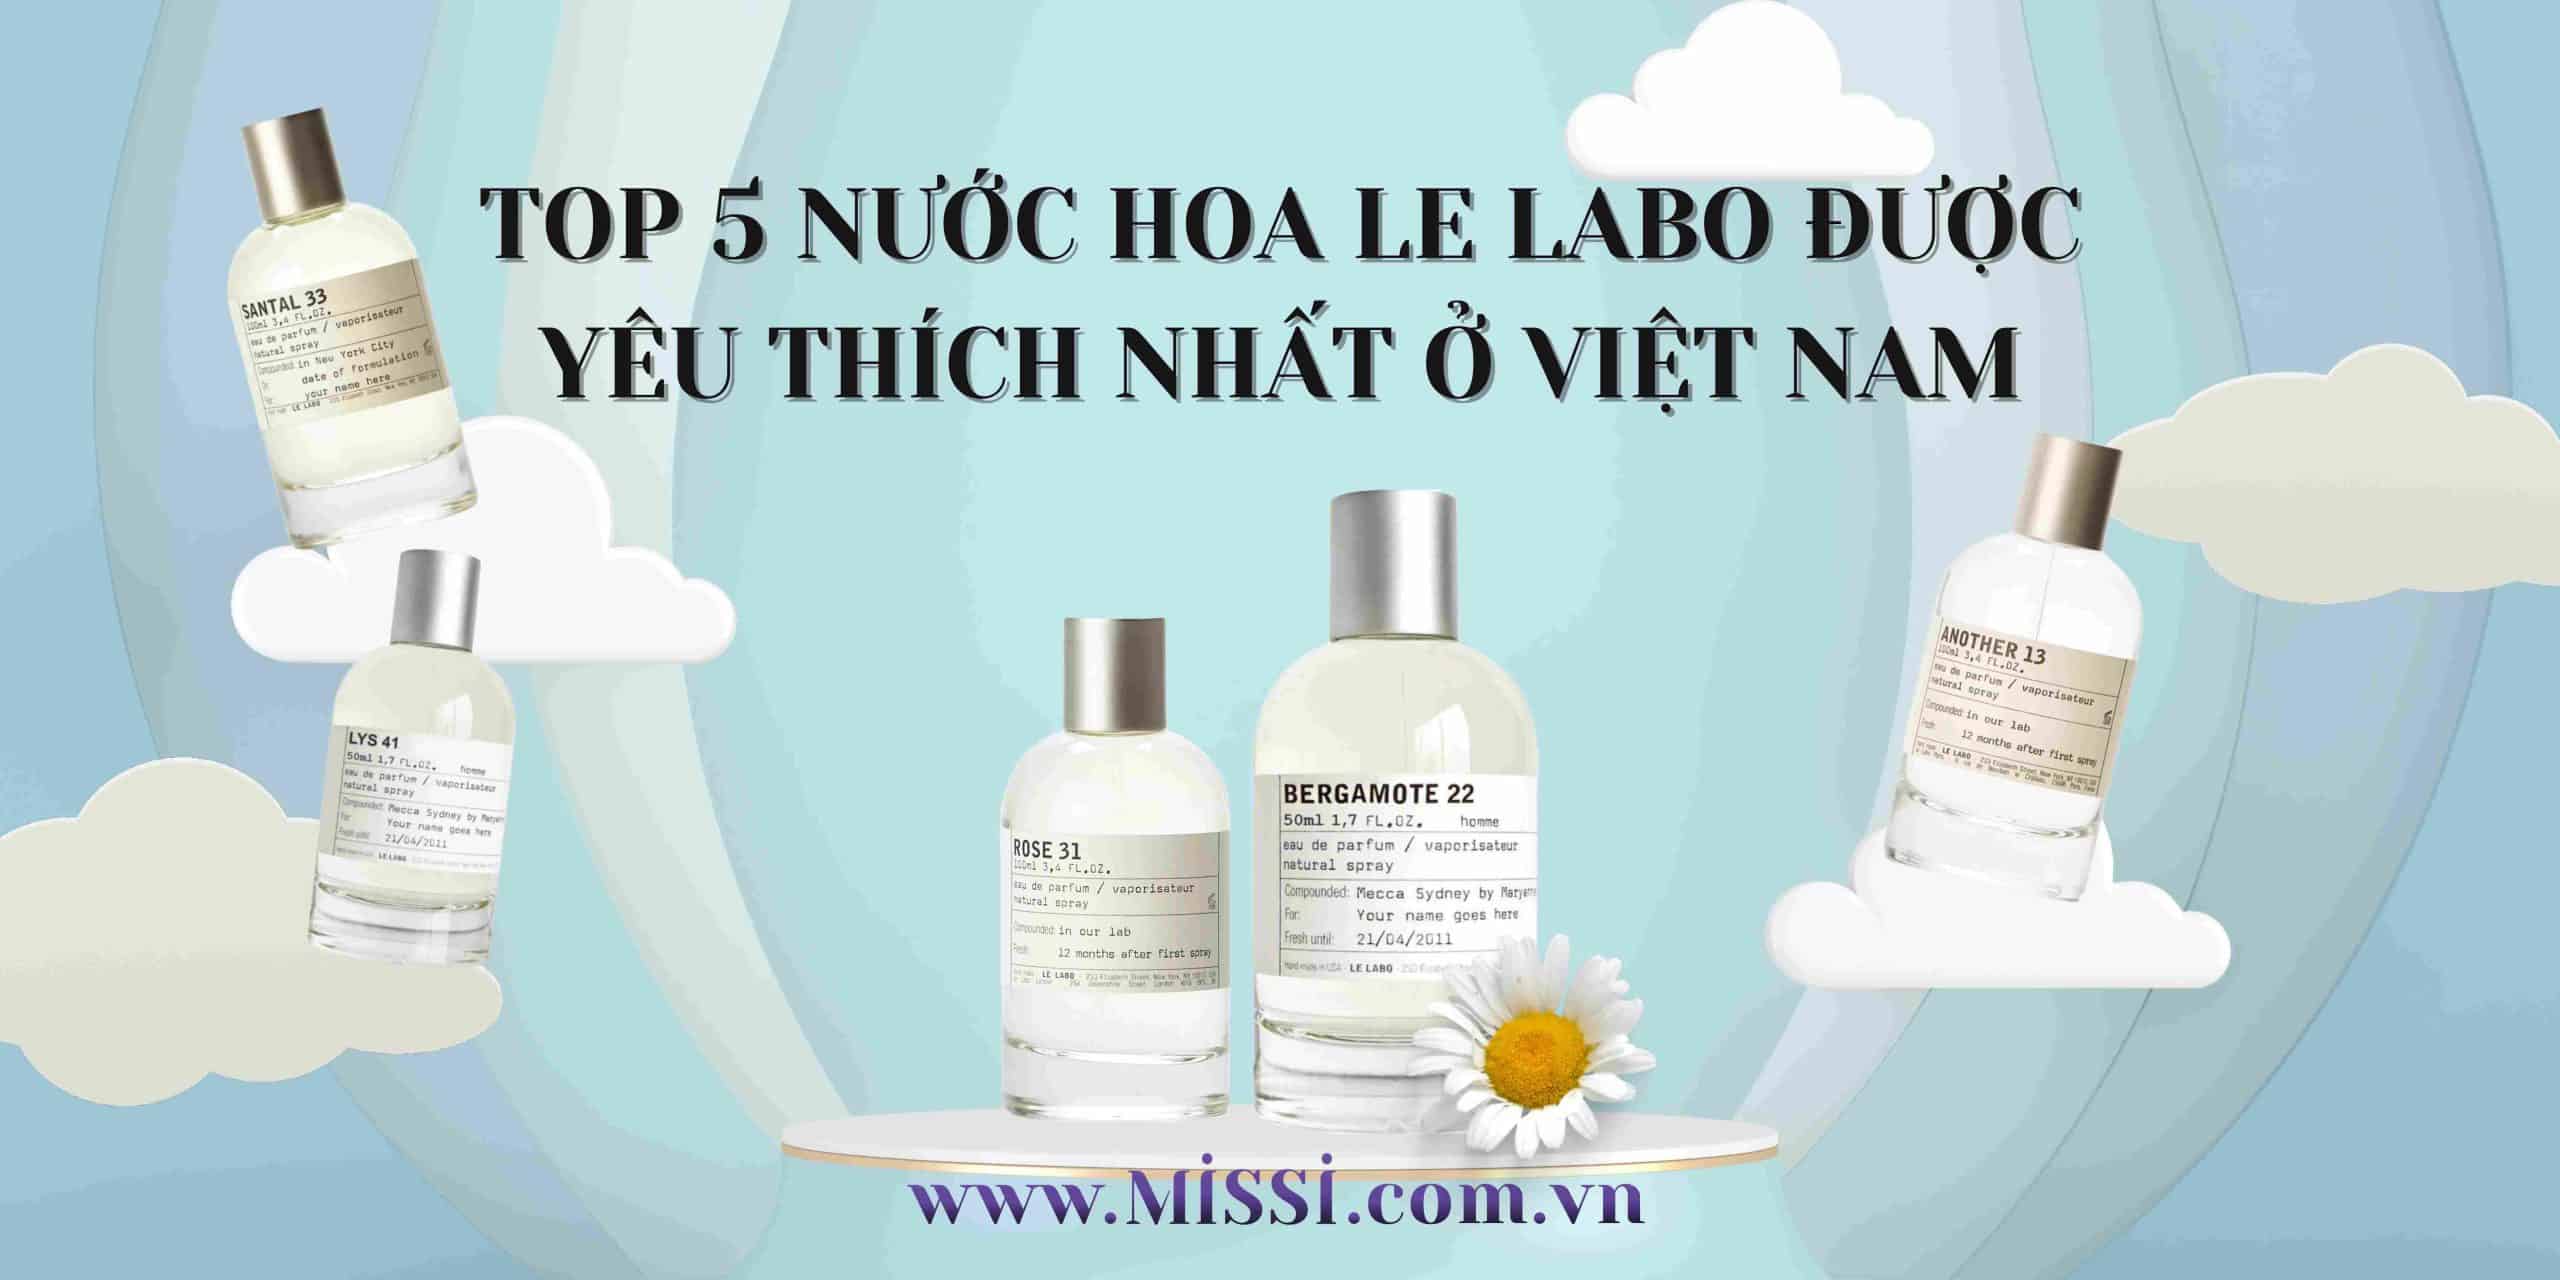 TOP 5 nuoc hoa Le Labo duoc yeu thich nhat o Viet Nam scaled